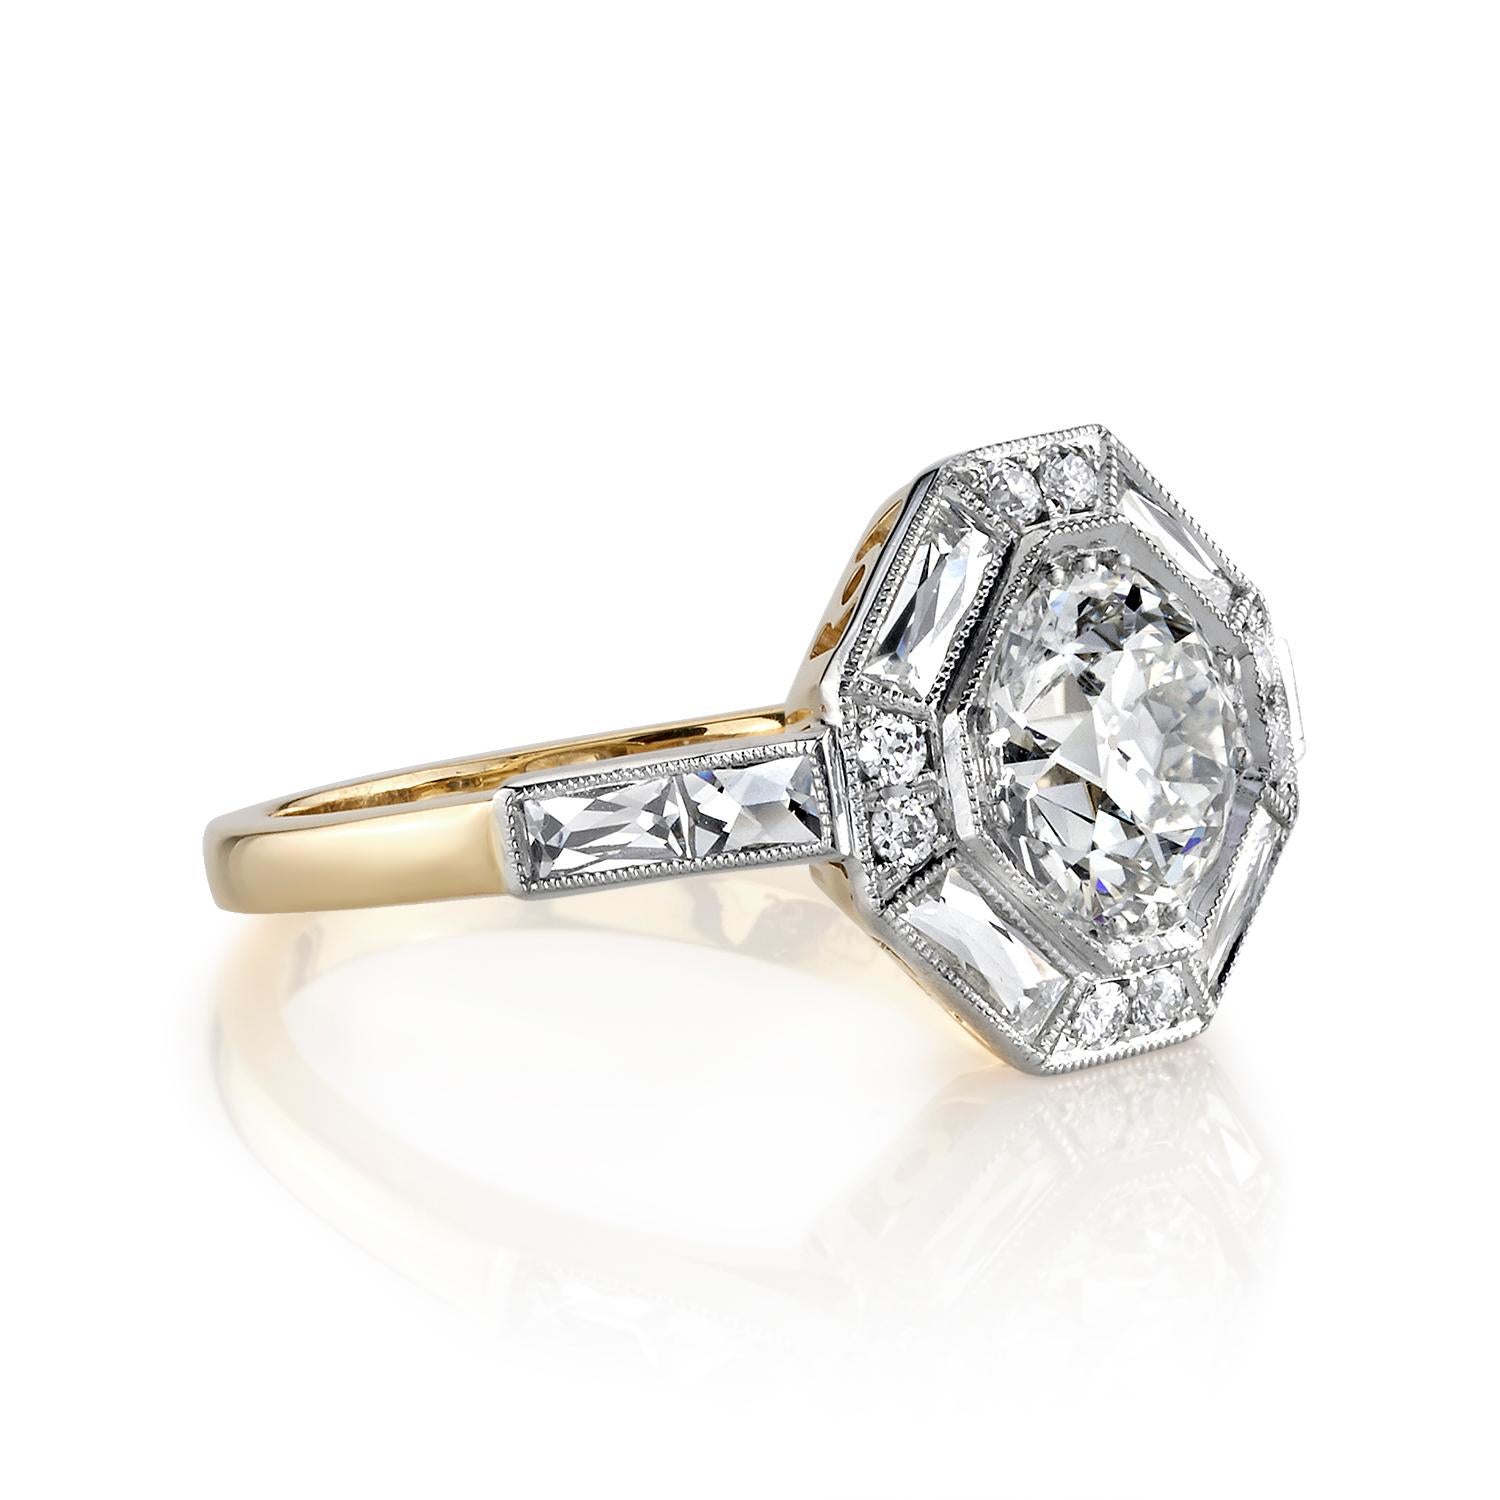 1.29ct I/VS2 GIA certified old European cut diamond with 0.30ctw mixed cut accent diamonds set in a handcrafted 18K yellow gold and platinum mounting.

Ring is currently a size 6 and can be sized to fit.

Our jewelry is made locally in Los Angeles